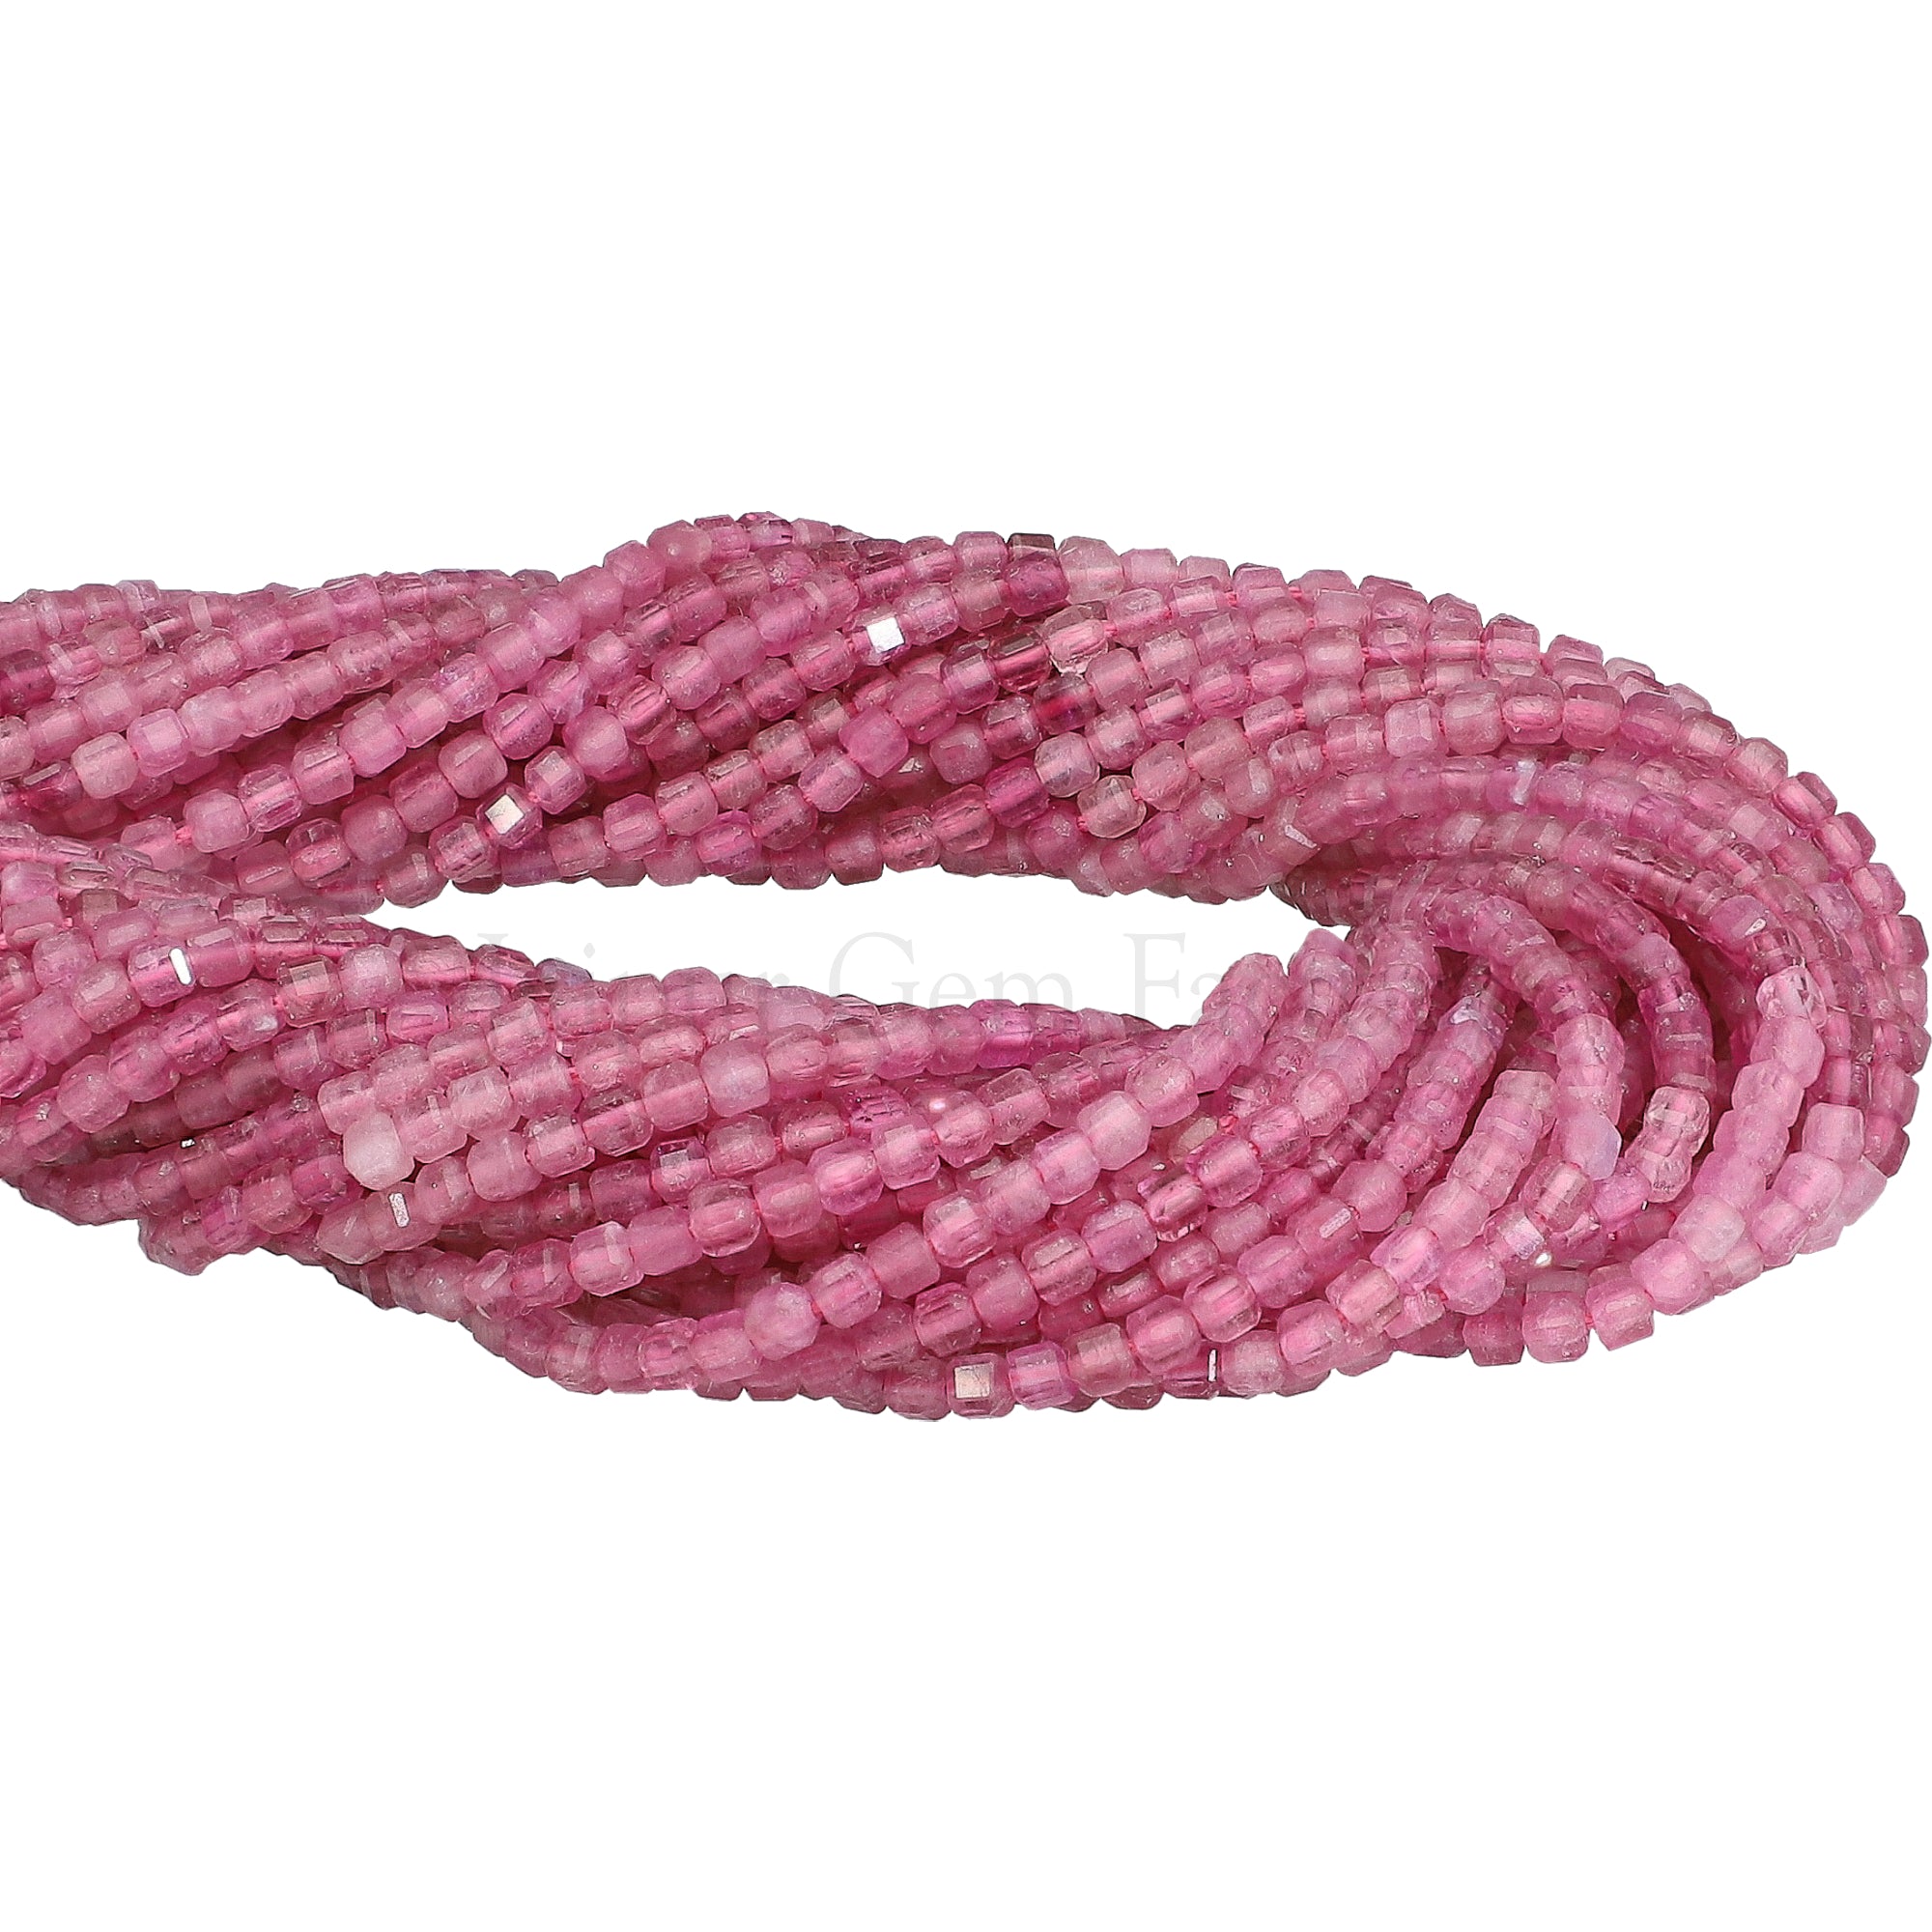 2.3-2.5 MM Pink Tourmaline Faceted Box Beads